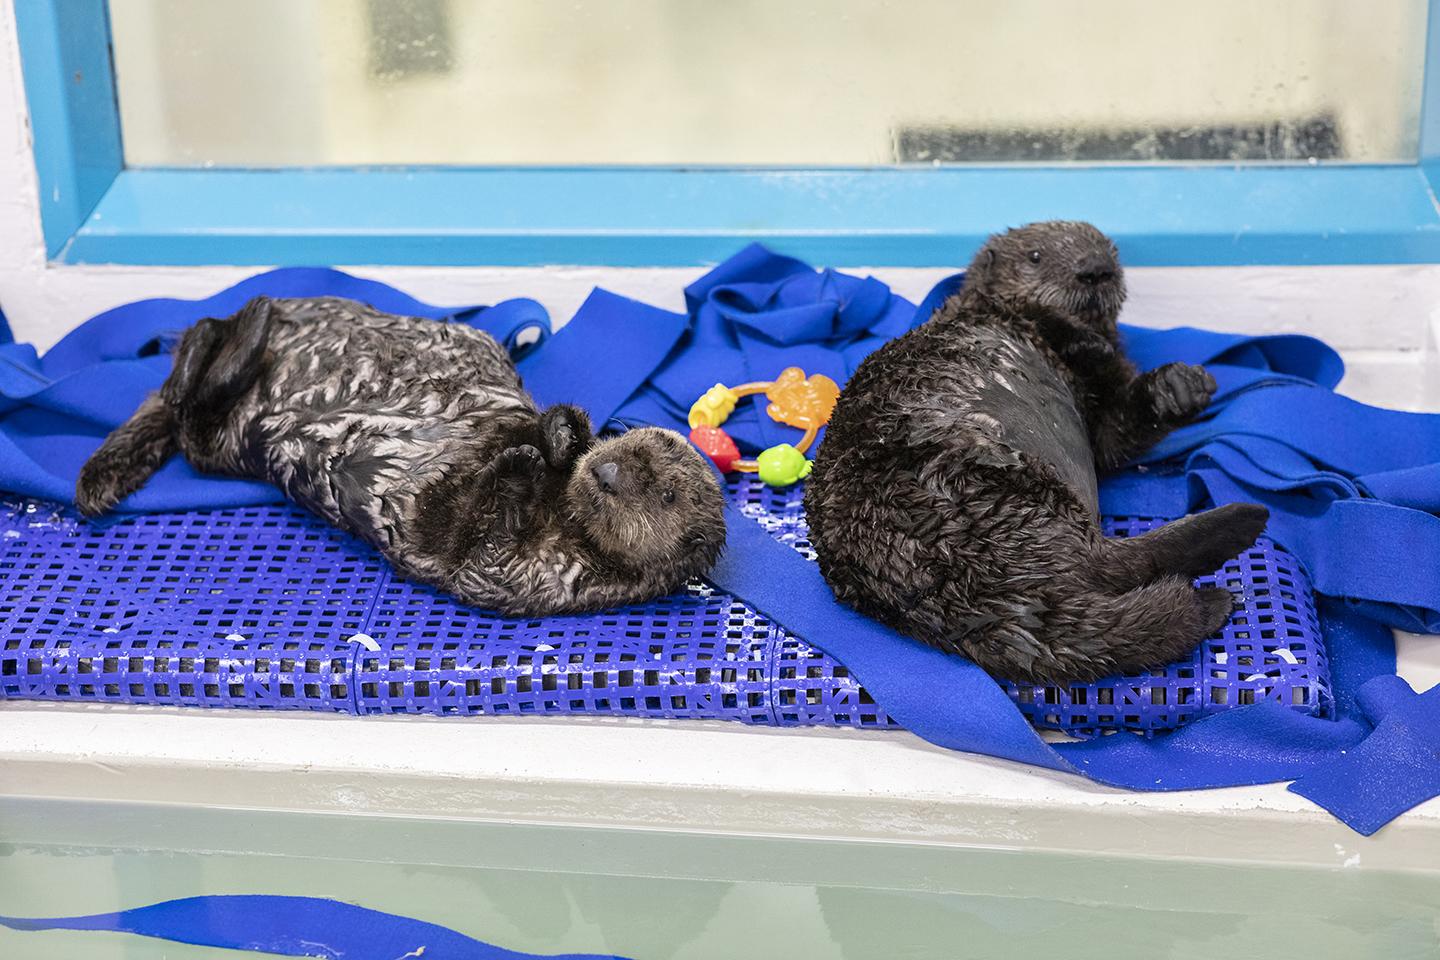 The pups play with plastic toys and can often be found wrestling playfully with each other. (Brenna Hernandez / Shedd Aquarium)